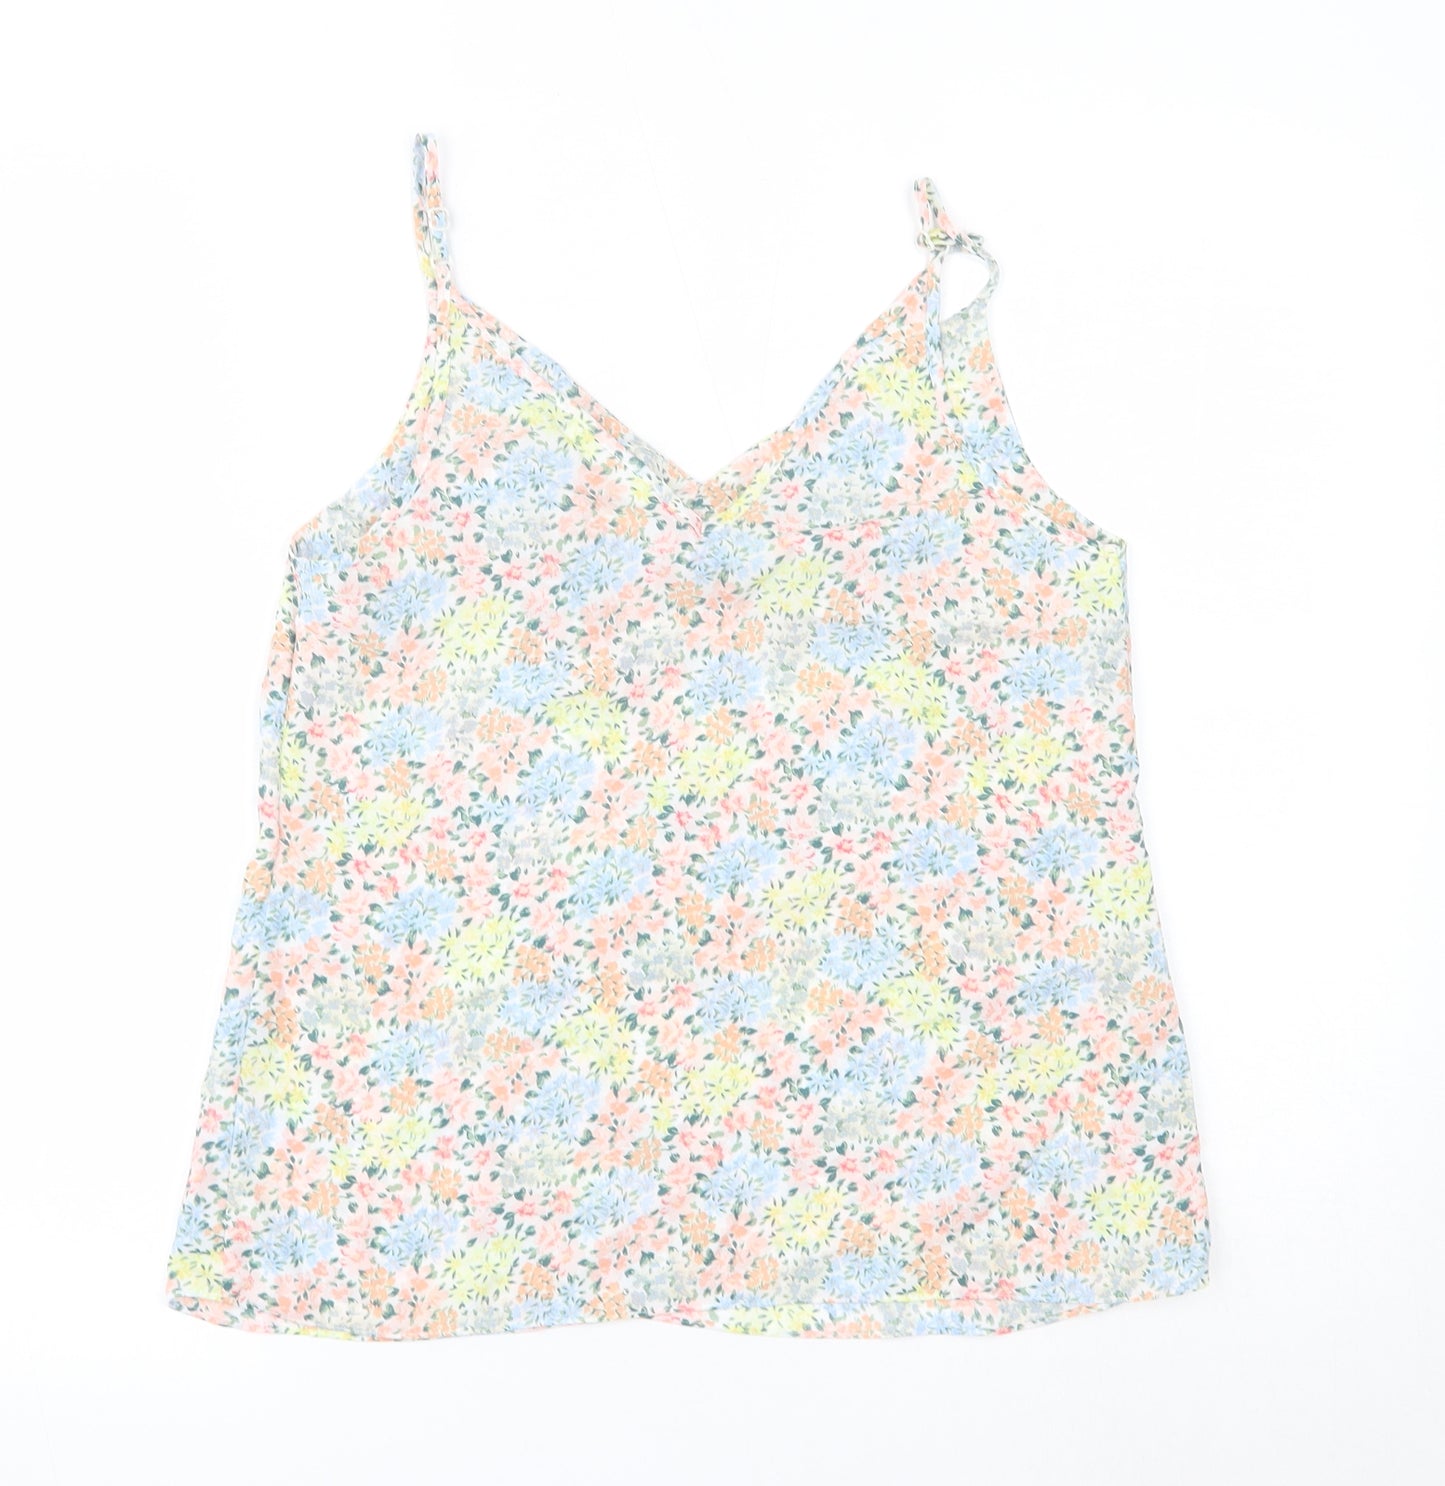 Primark Womens Multicoloured Floral Polyester Camisole Tank Size 8 V-Neck